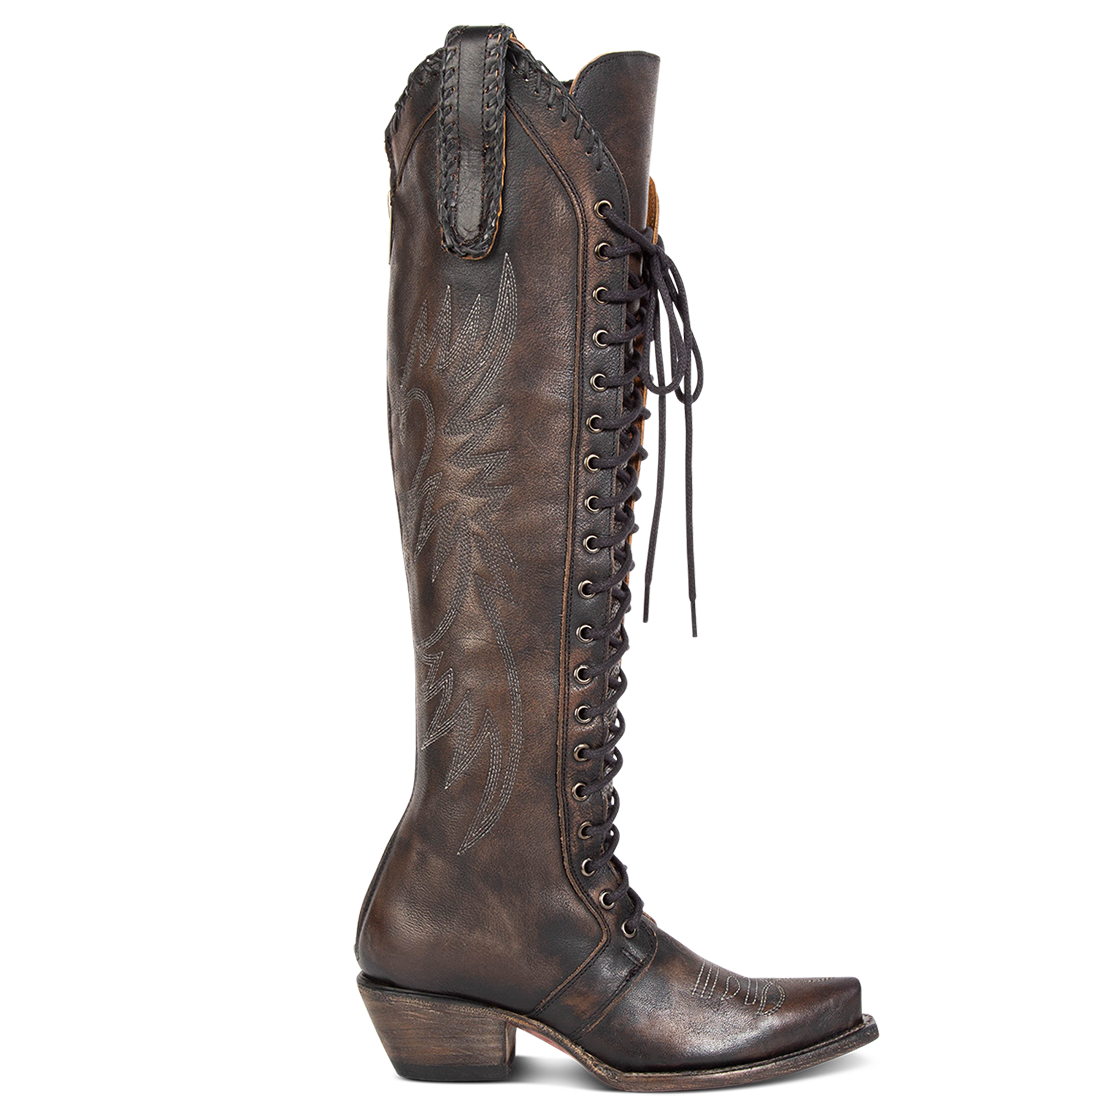 FREEBIRD women's Wilder black boot featuring a tall lace up shaft, contrasting stitch detailing, woven leather accents, and a back brass zip closure